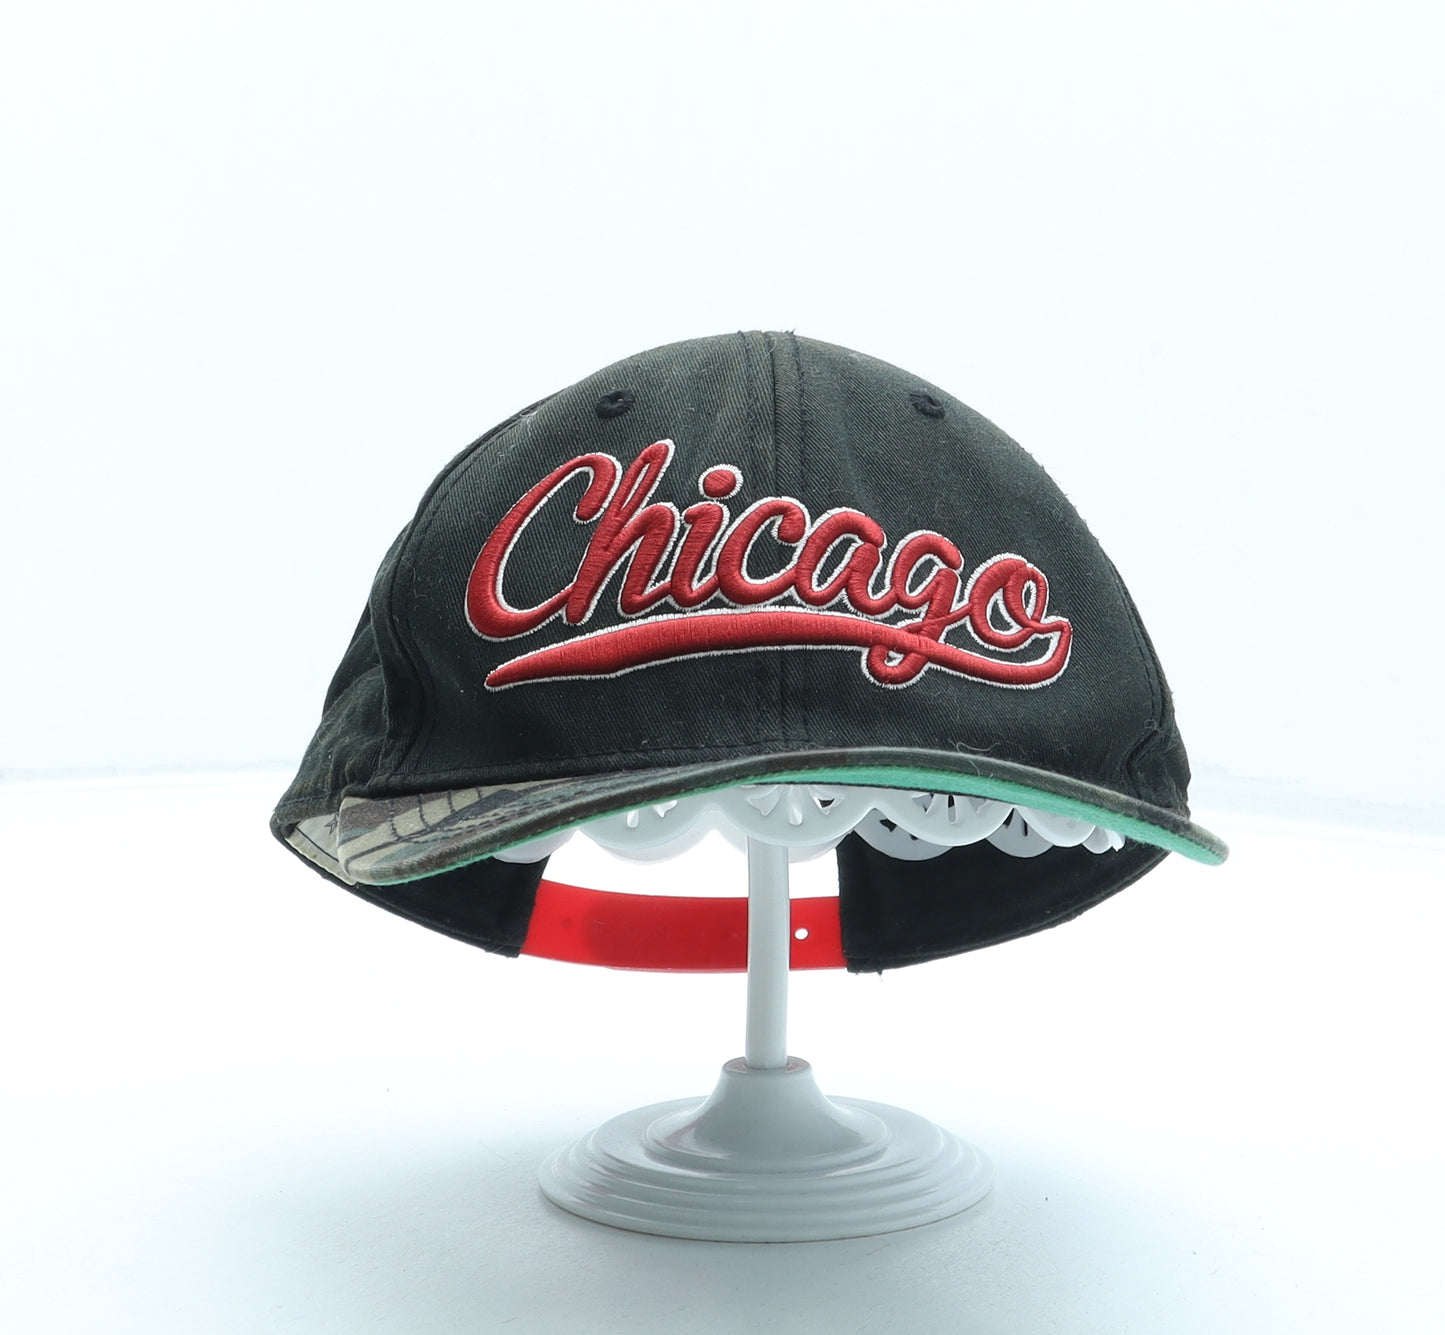 No Fear Boys Black Polyester Snapback One Size - Chicago